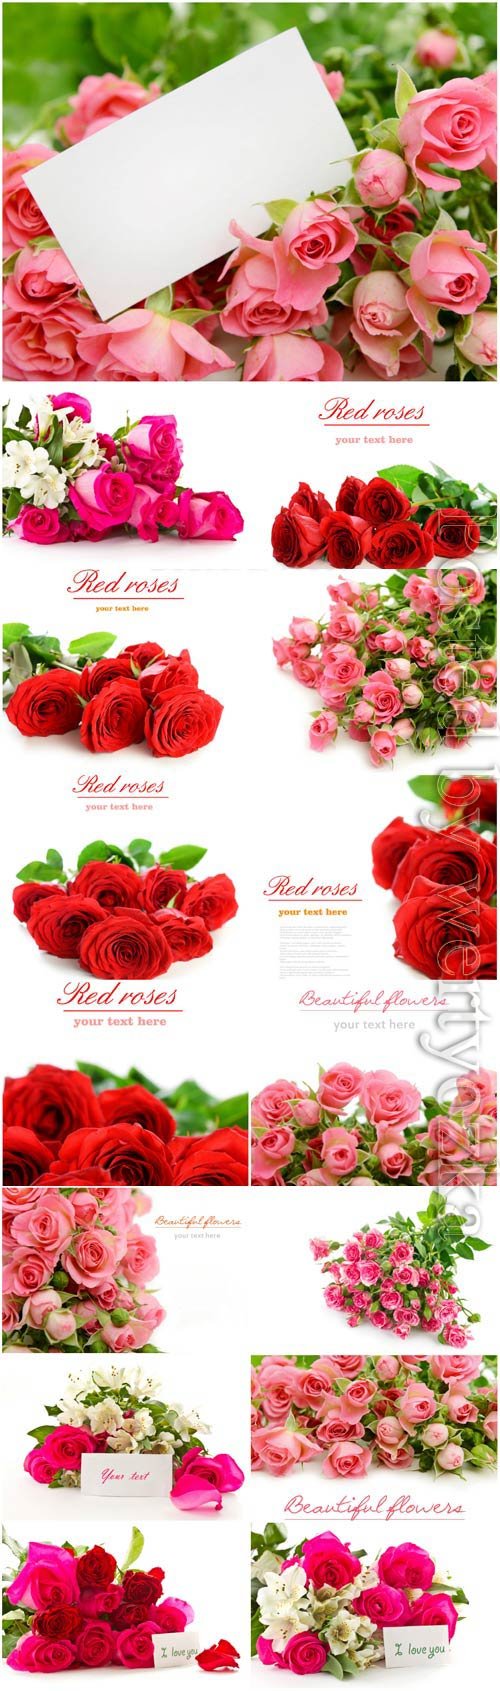 Bouquets of lovely roses stock photo